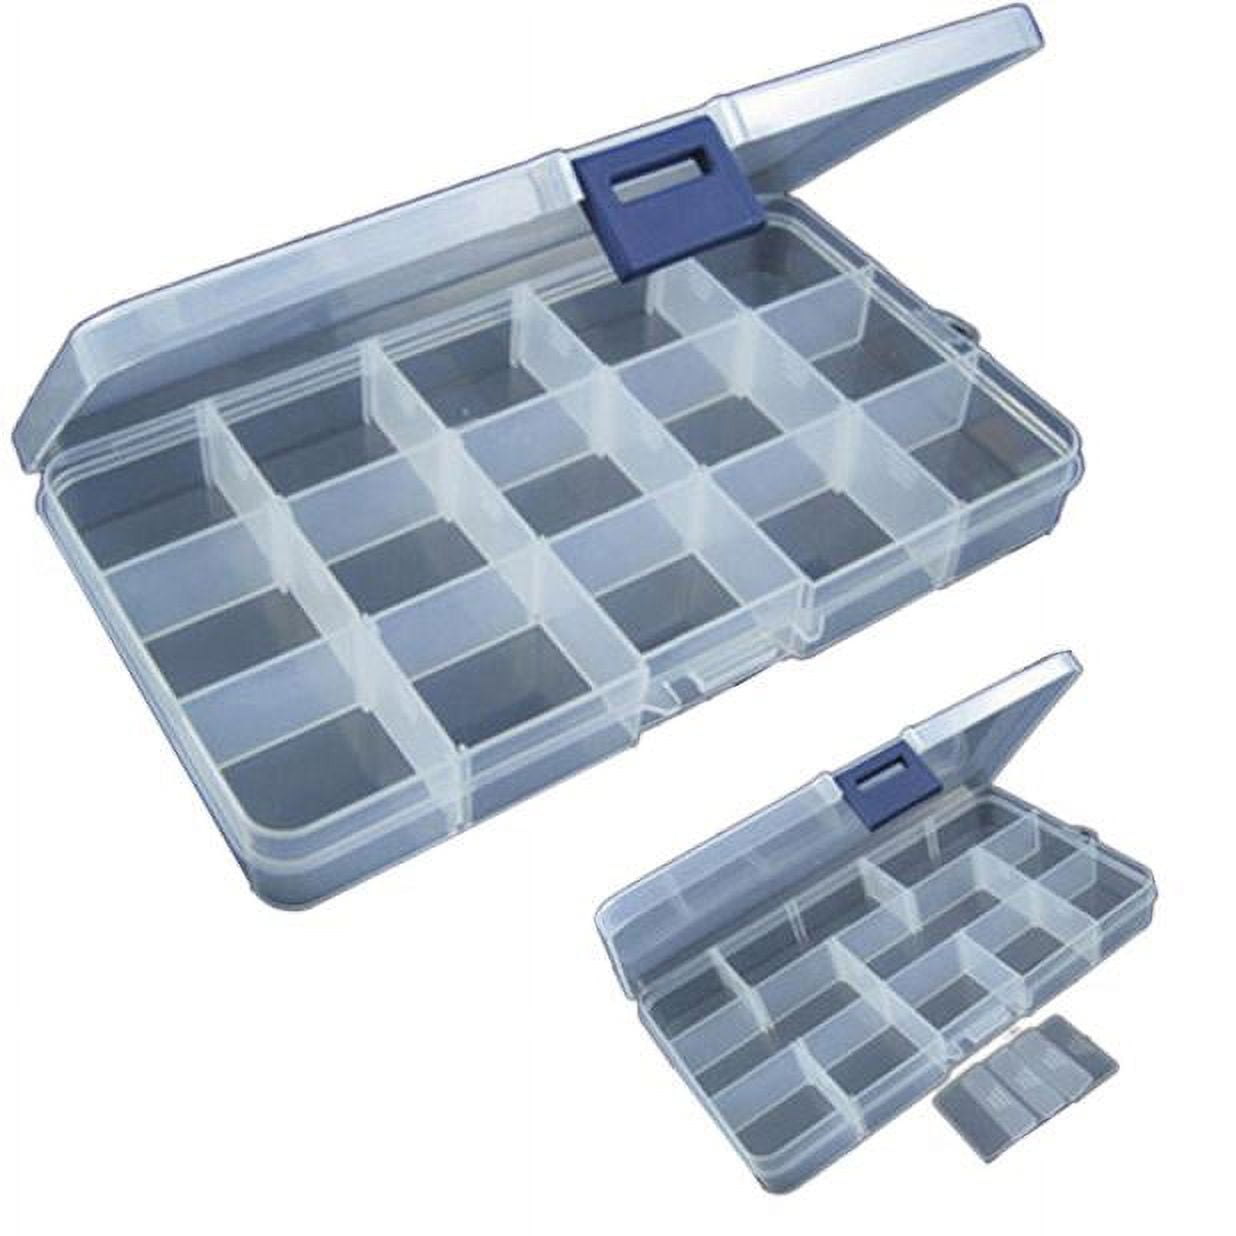 RUNCL Fishing Tackle Box - Clear Plastic Storage Organizer for Lures,  Baits, and Tools with Removable Dividers - 2 Pack Combo Set